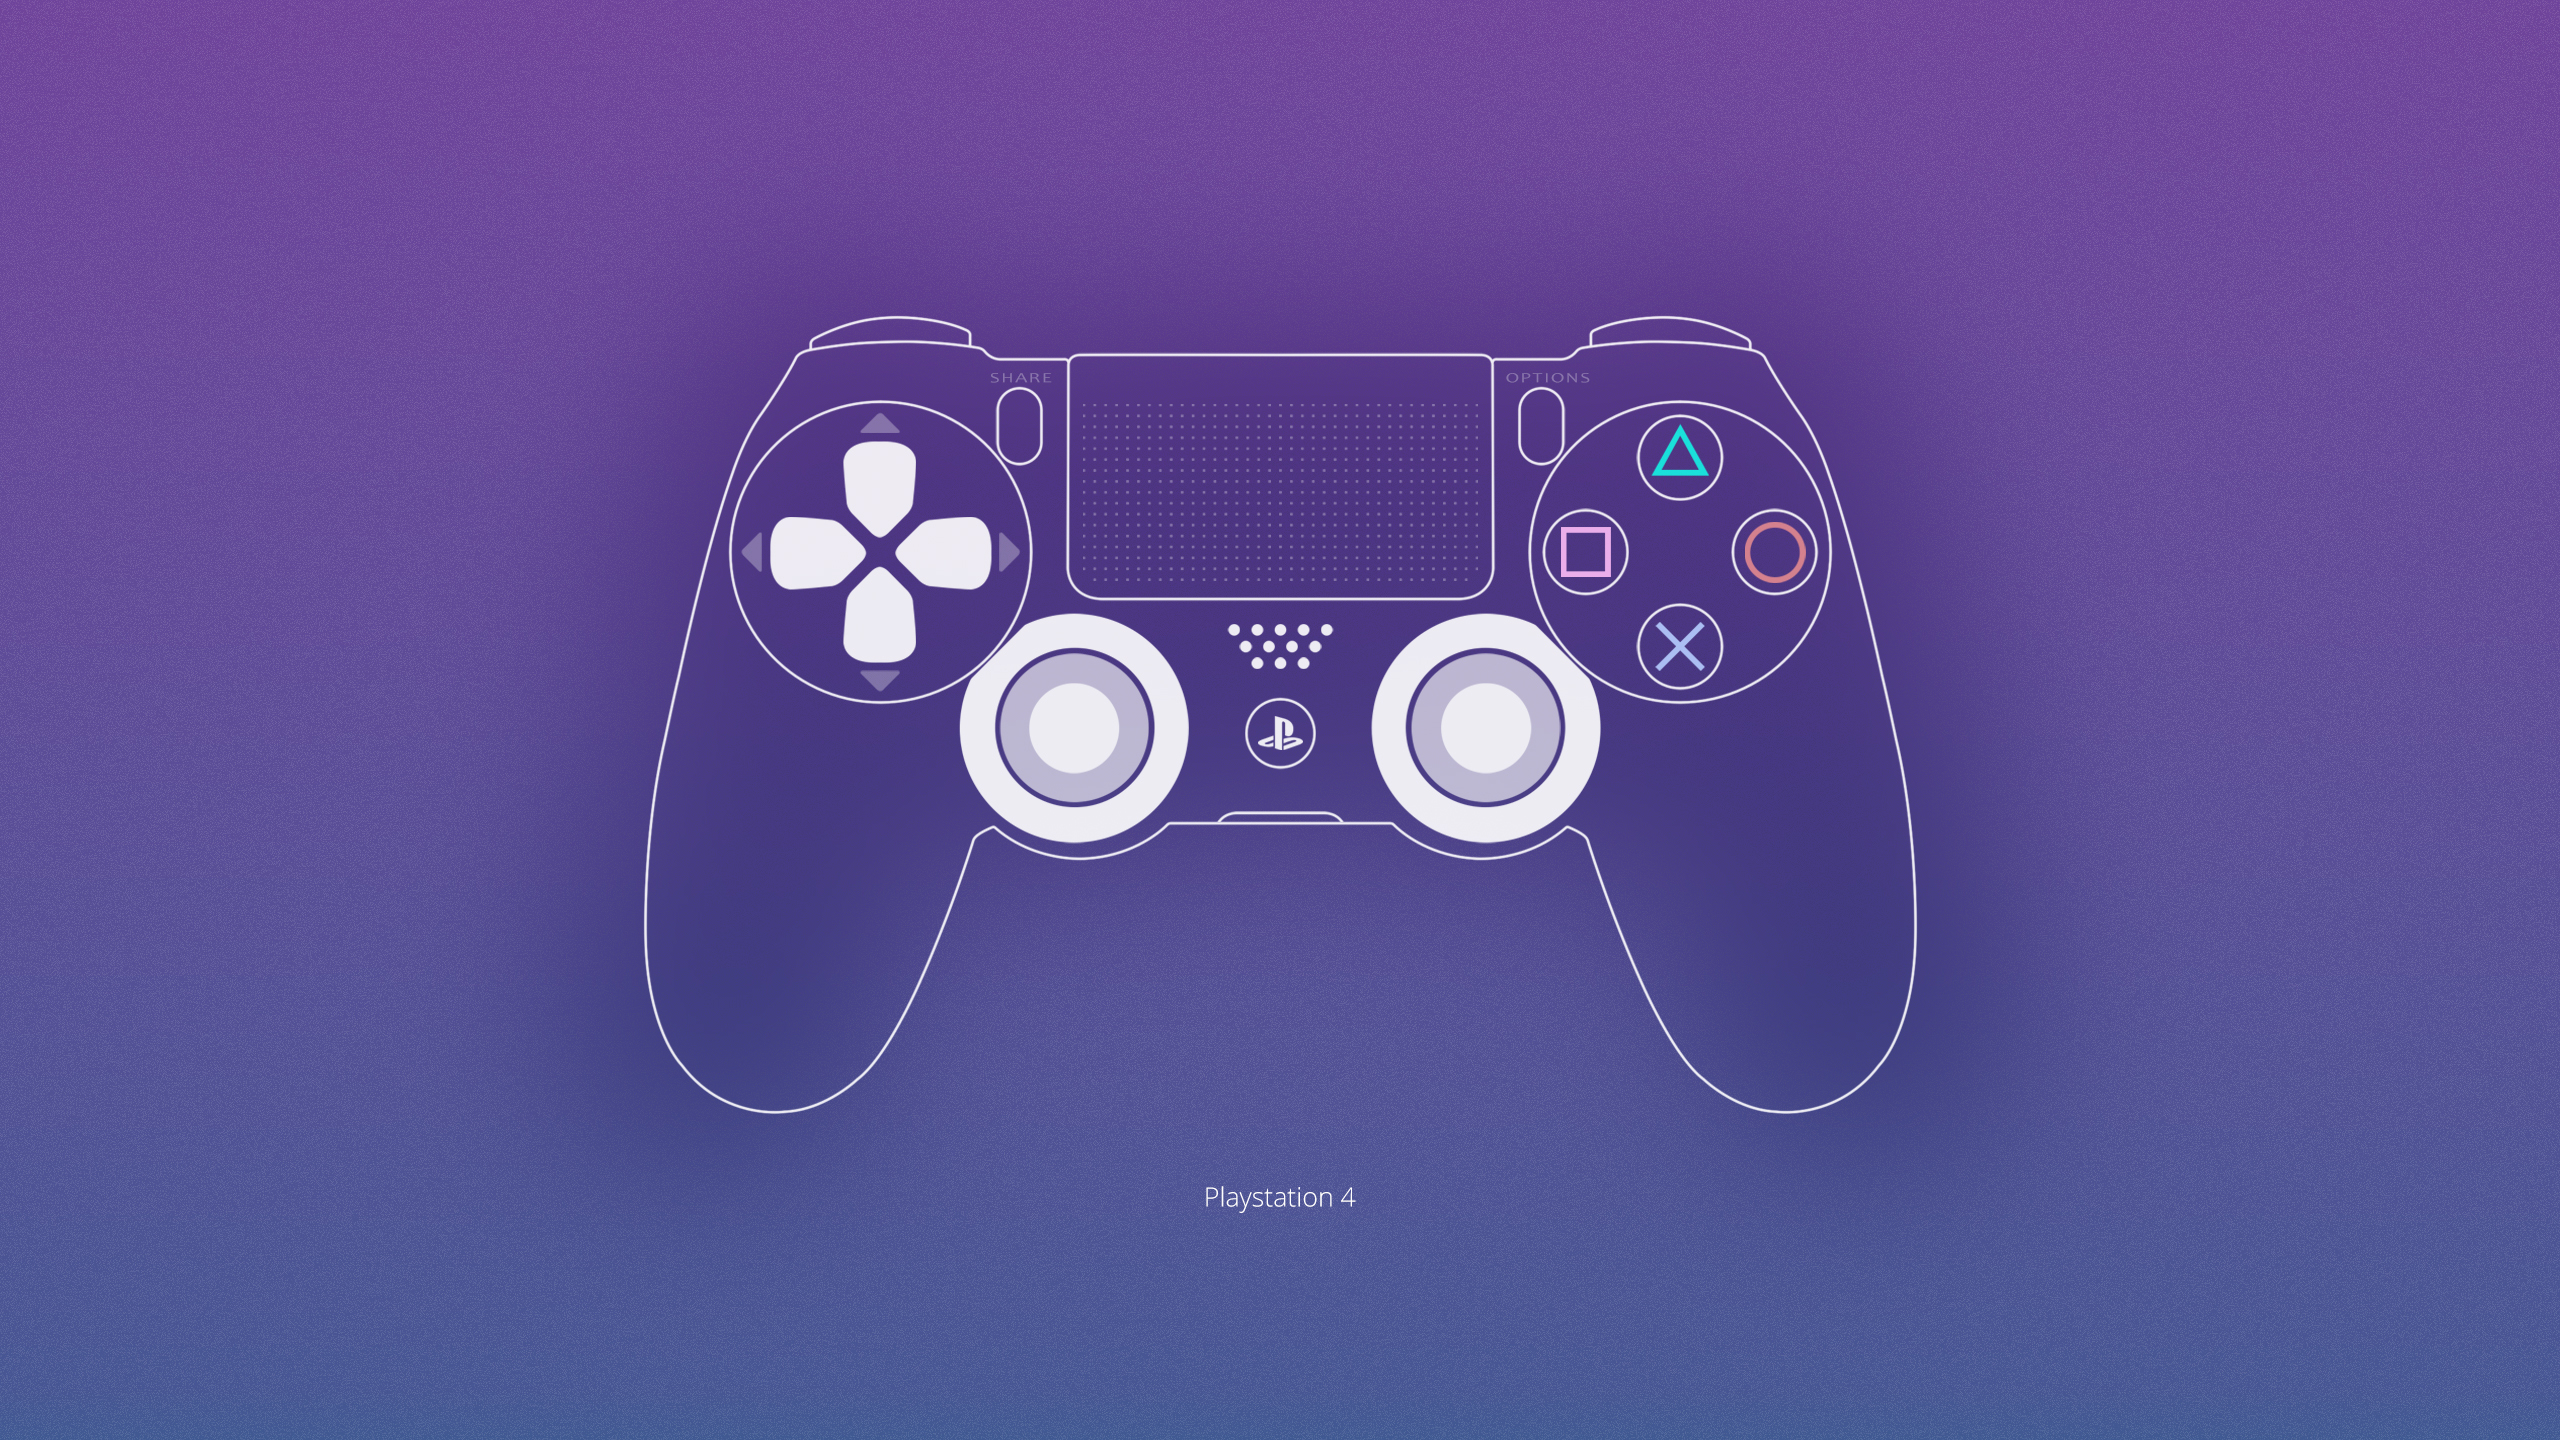 Download Wallpaper Ps4 Console Gamepad Dualshock Section Hi Tech In Resolution 2560x1440